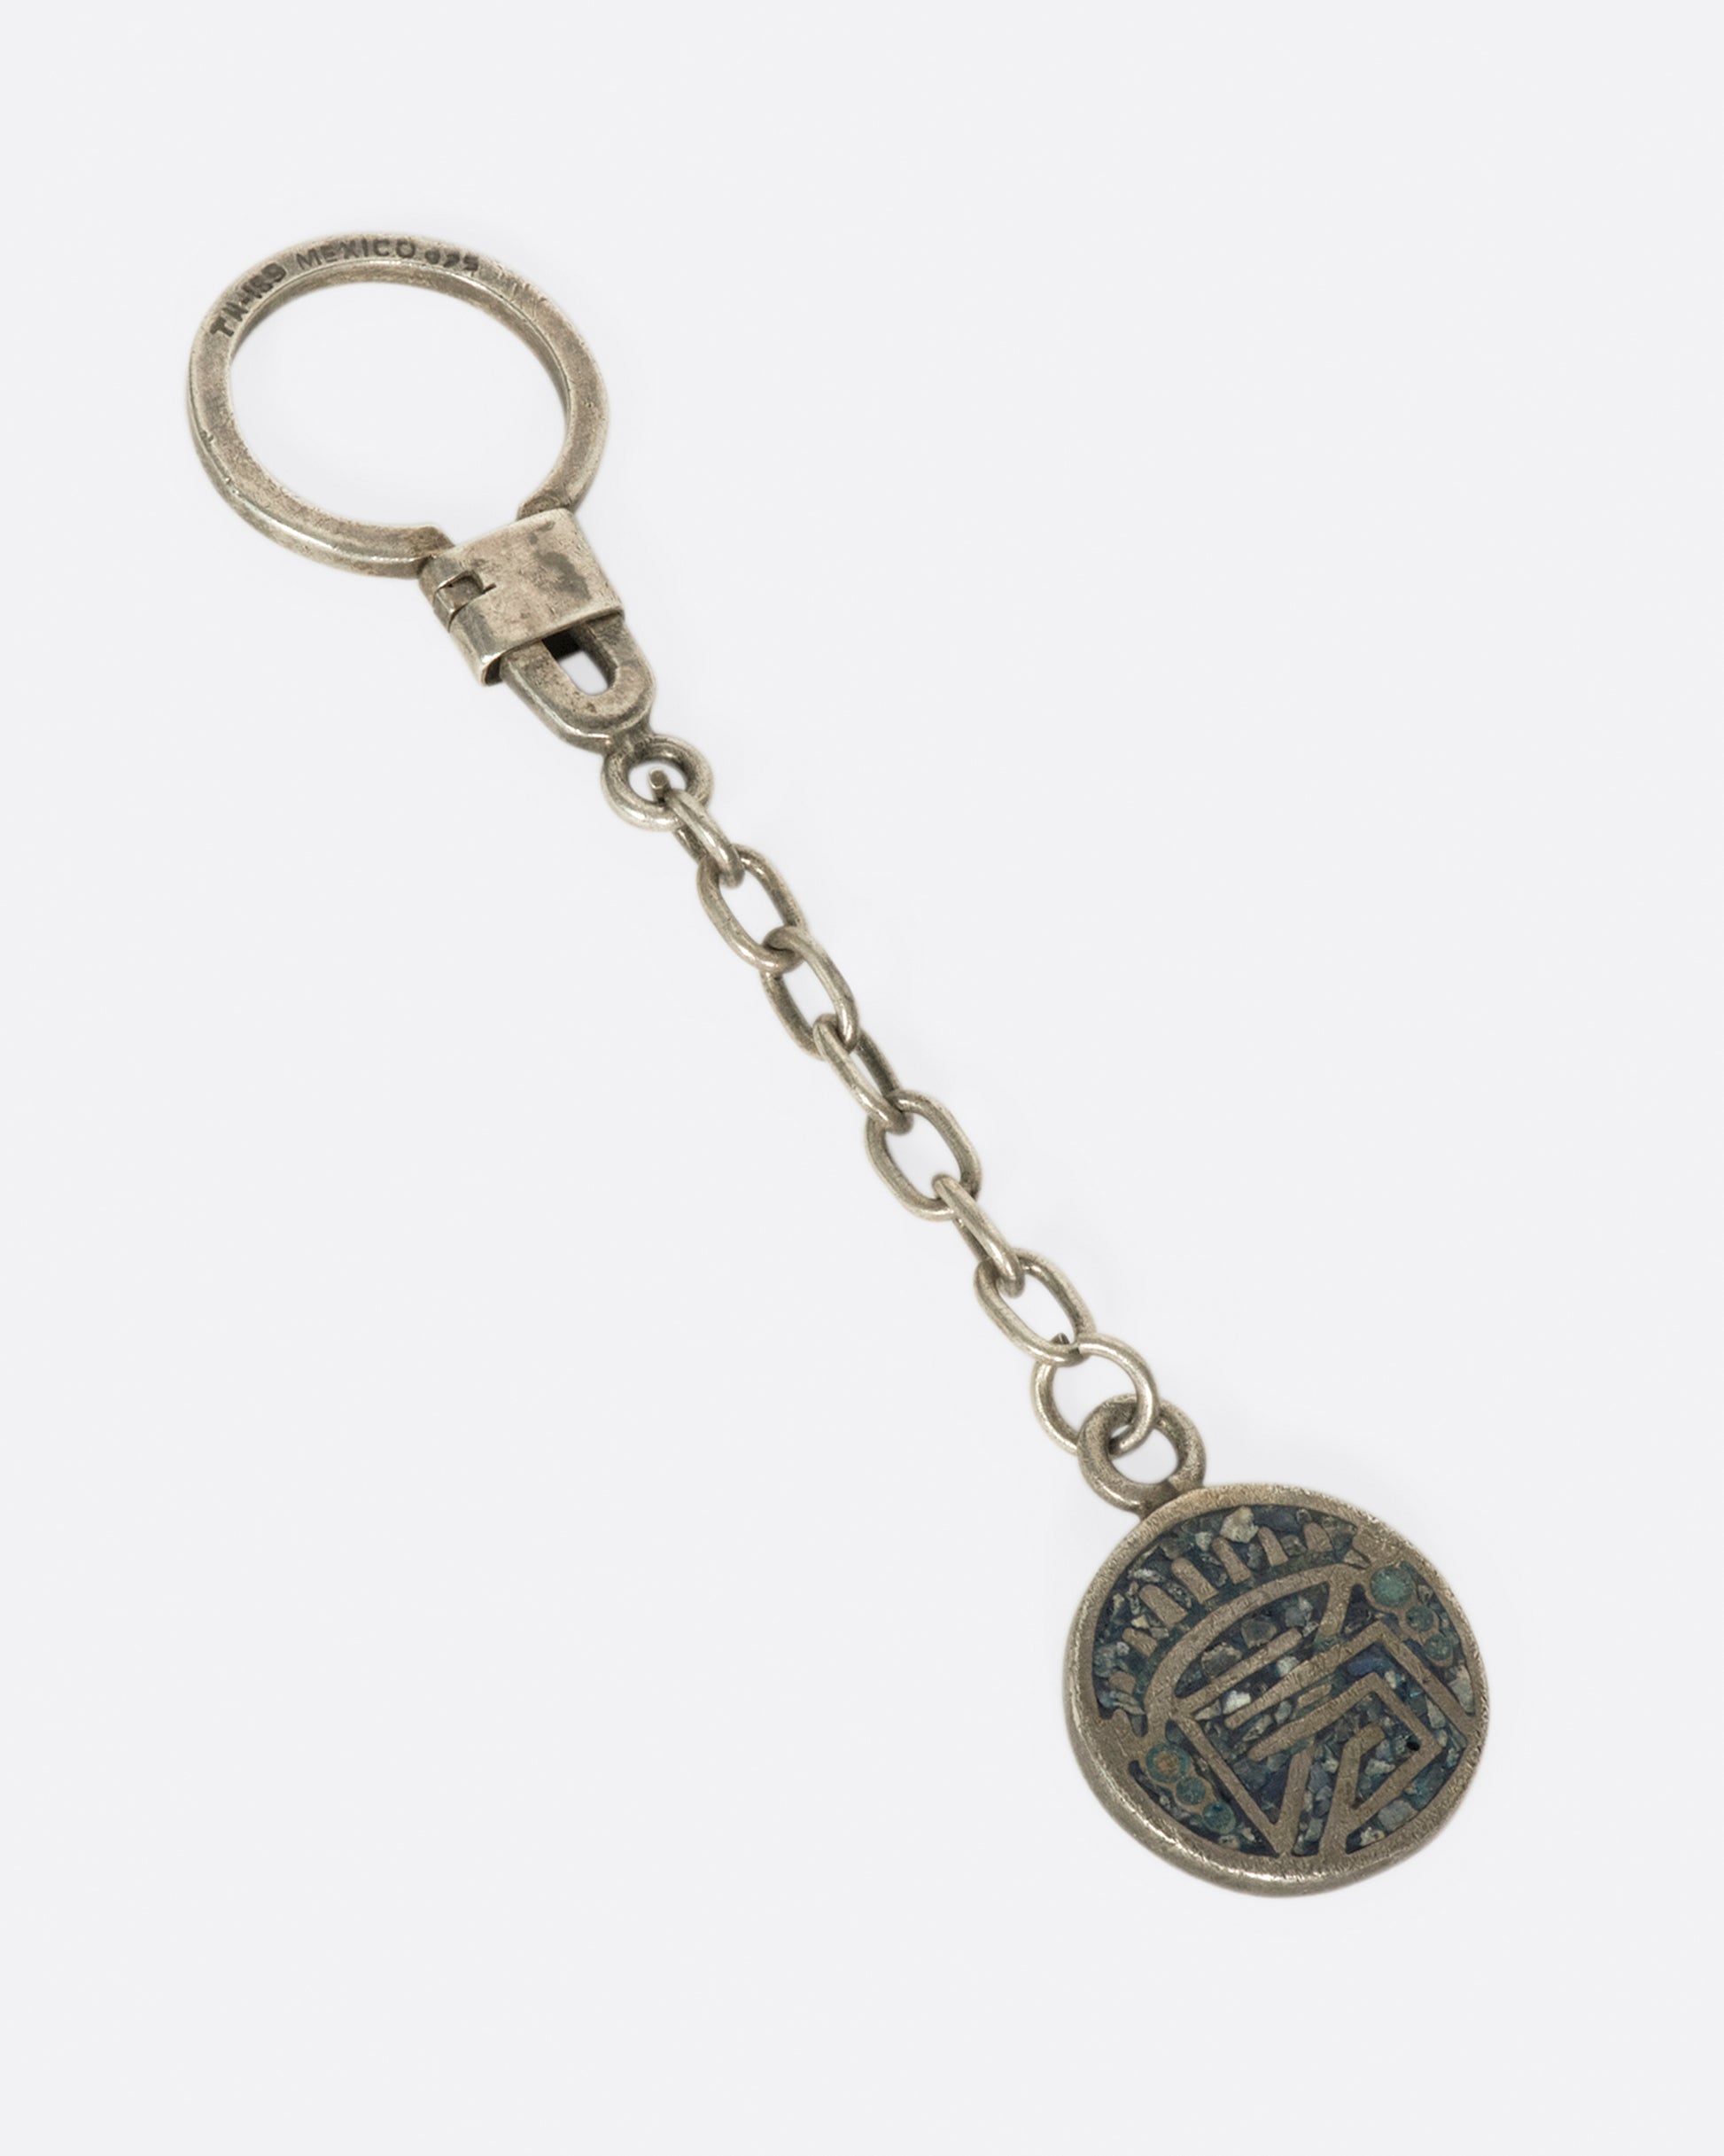 A vintage sterling silver keyring with sodalite inlay, symobolizing wisdom.